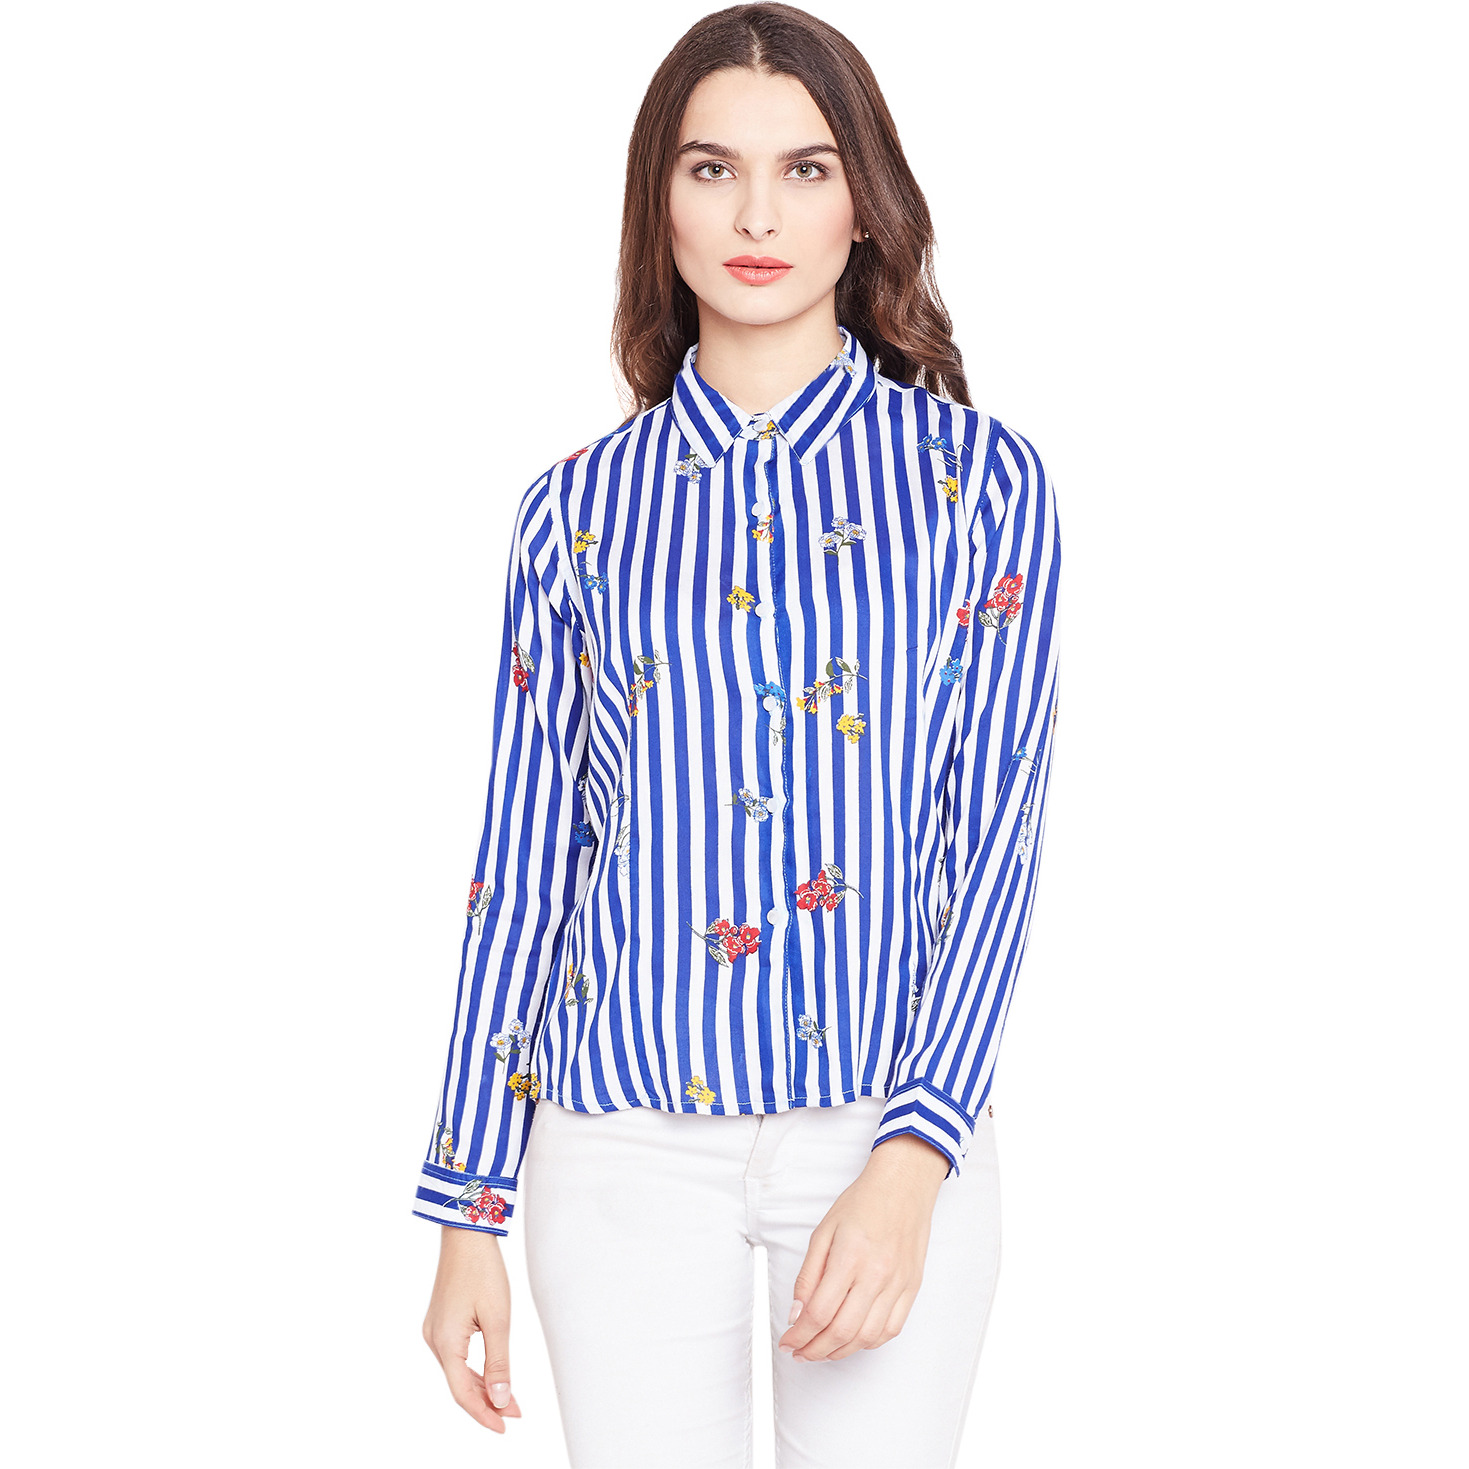 Purplicious Blue and White Floral Striped Casual Shirt